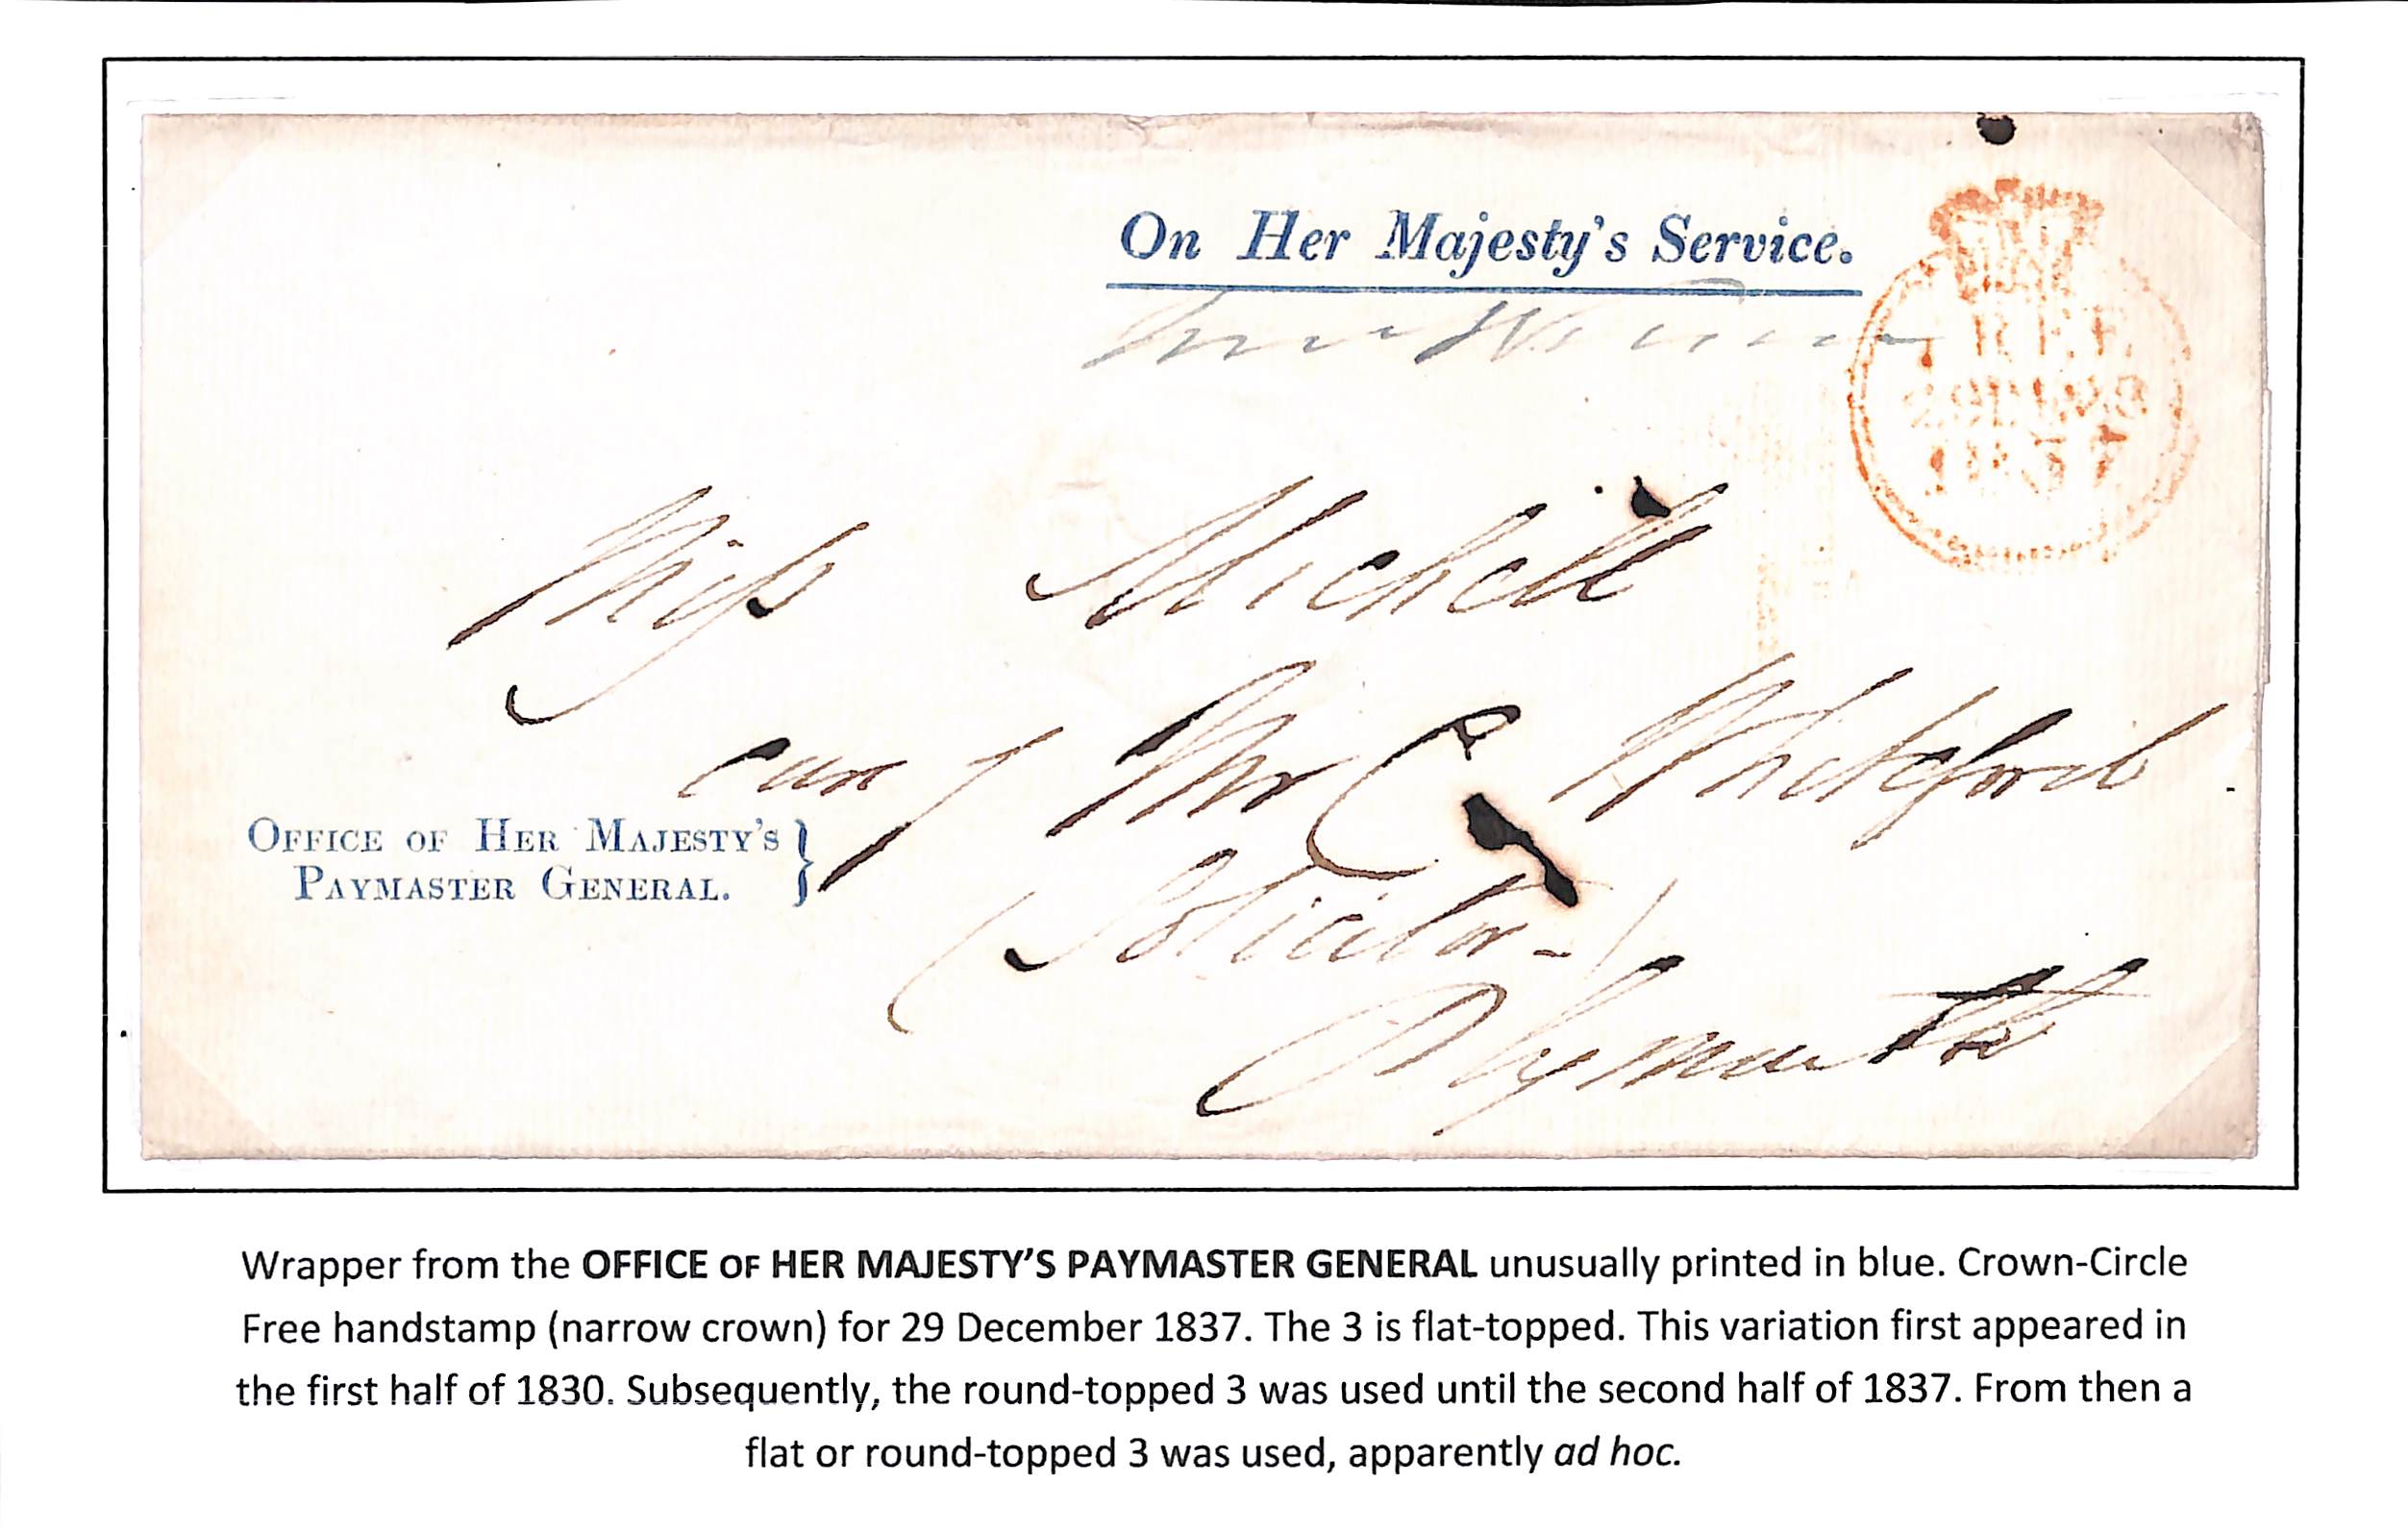 Paymaster General. 1837 (Dec 29) Lettersheet with "On Her Majesty's Service" heading and "OFFICE